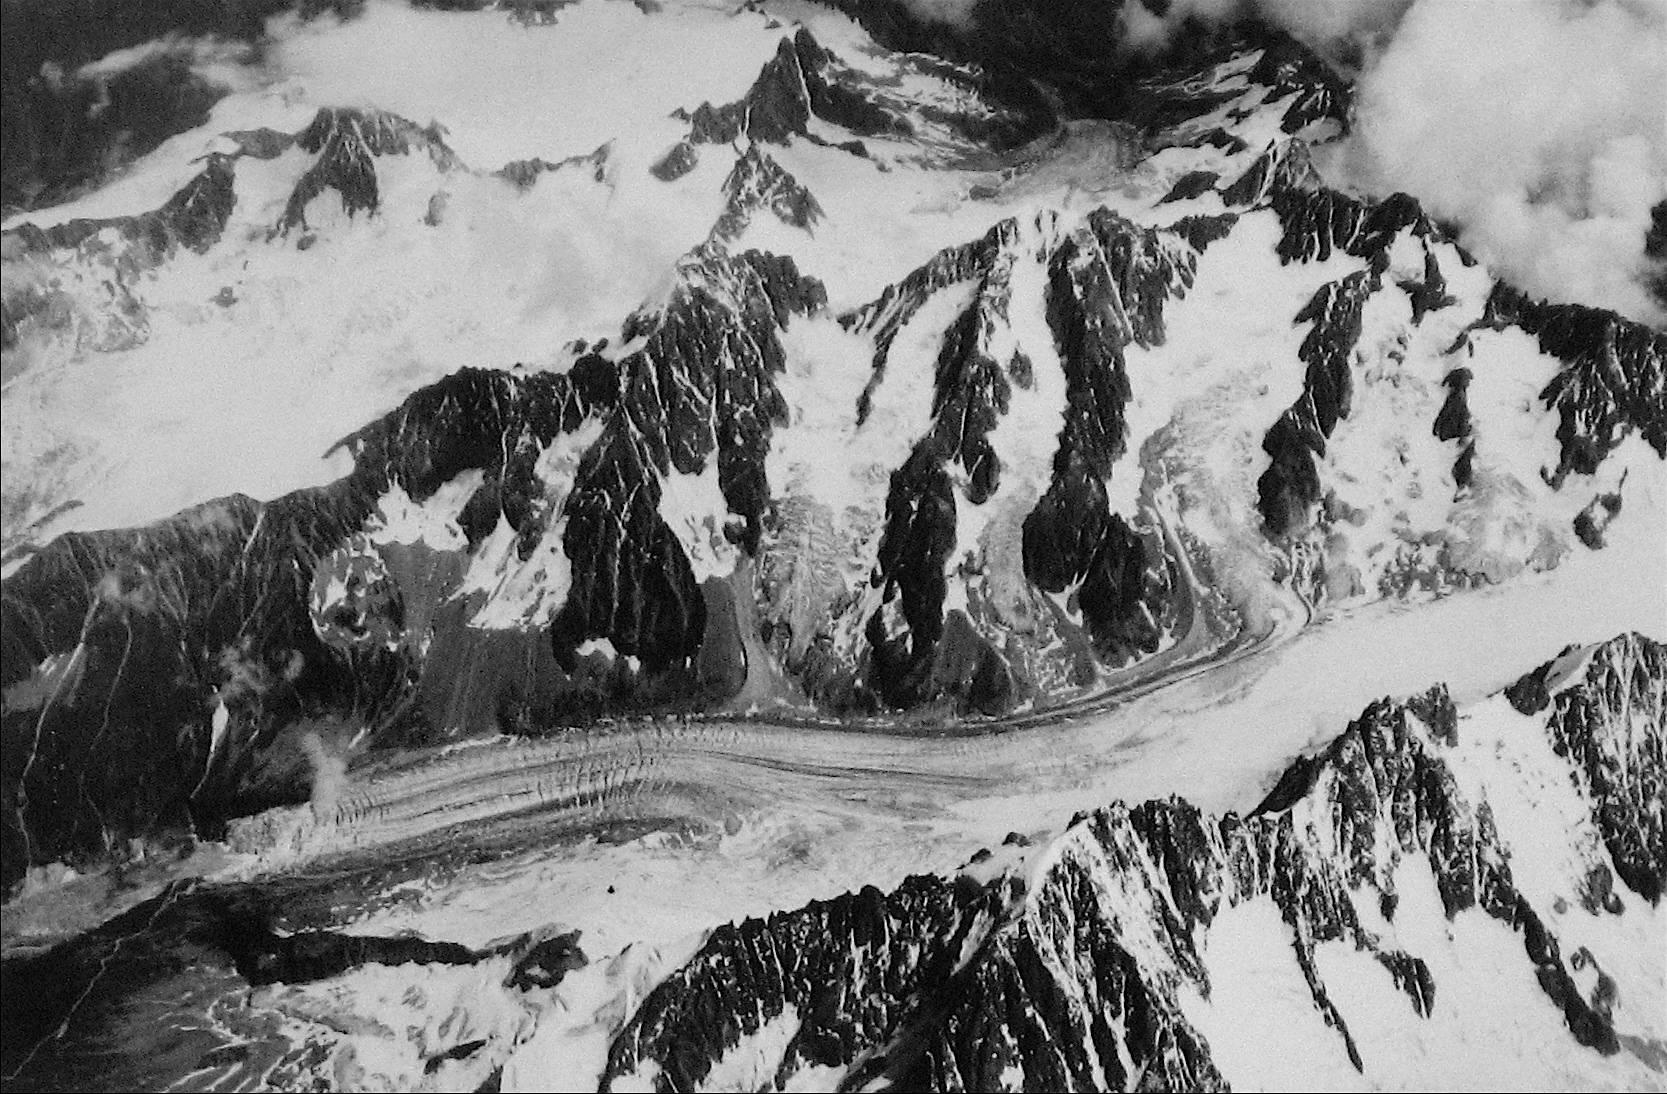 Mountains with Snow, Switzerland, Greece, Black and White Photograph, 1960s